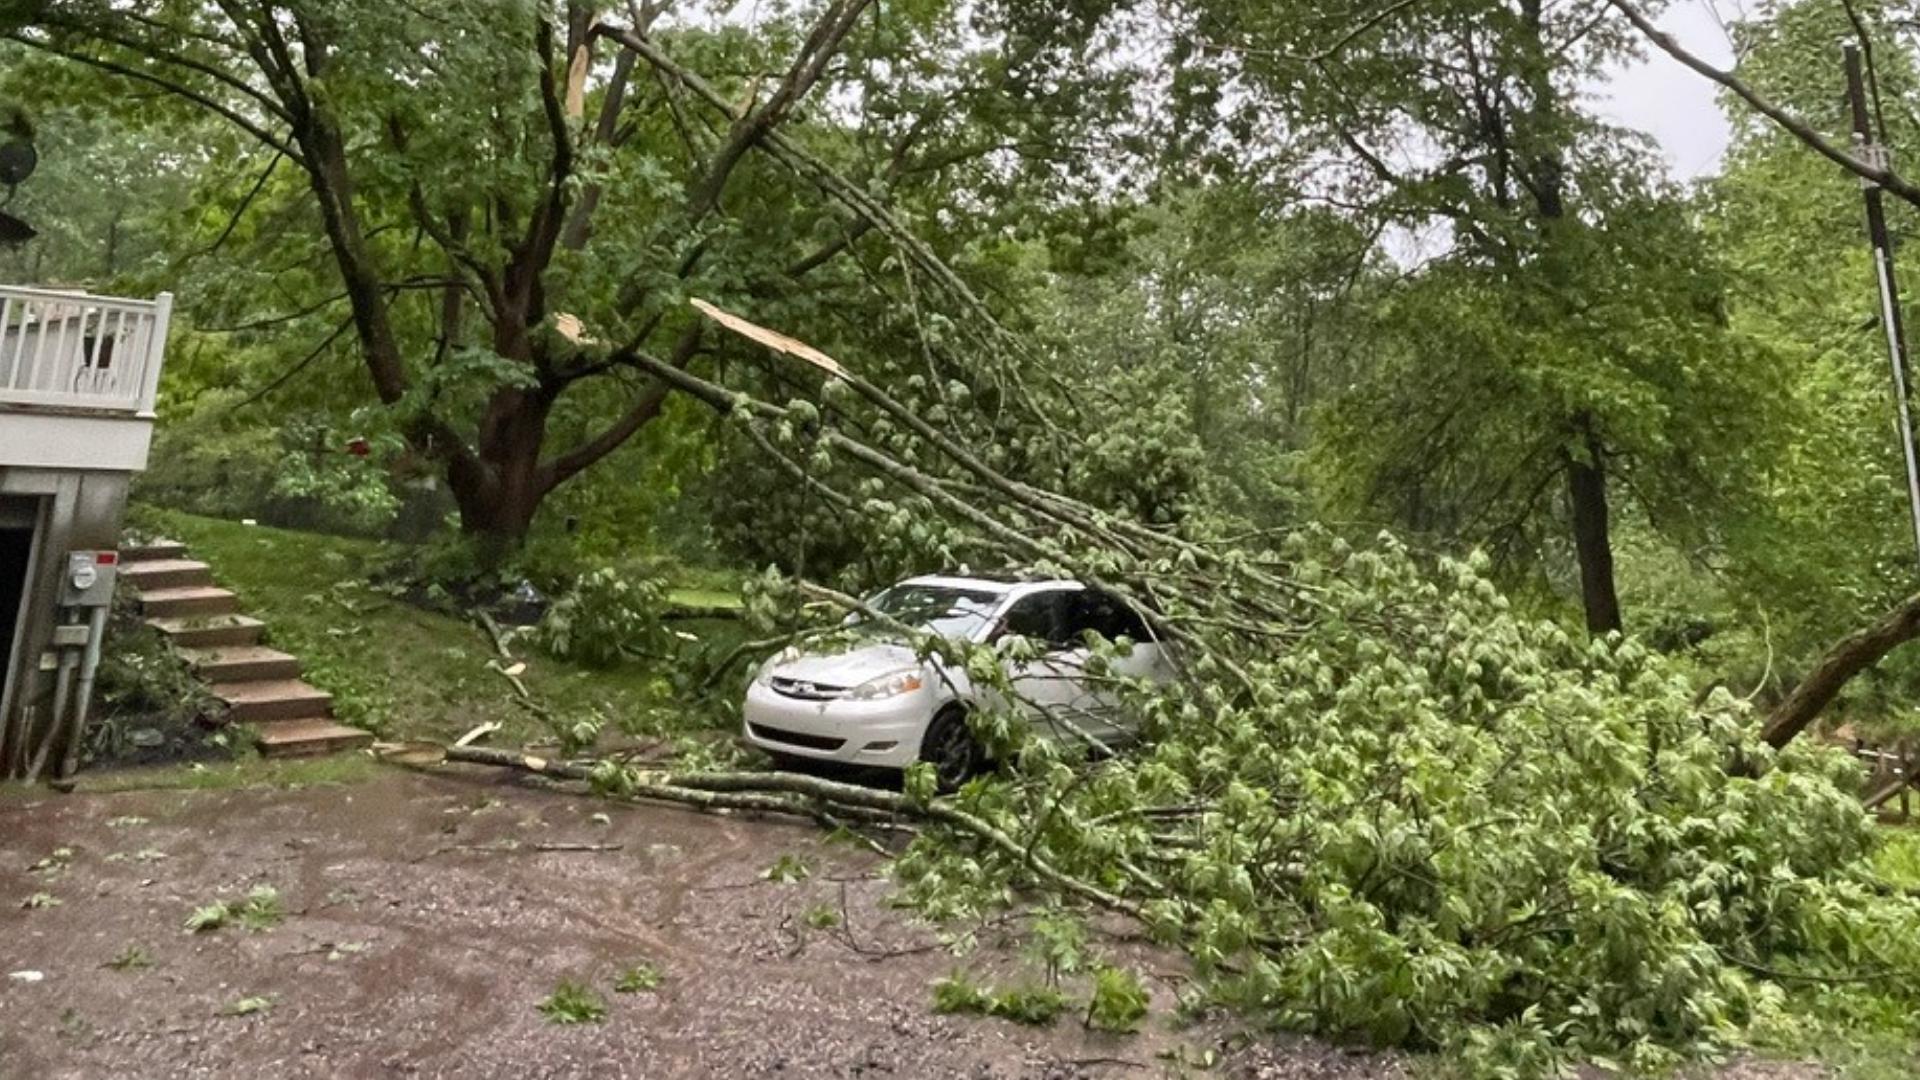 Parts of the area are cleaning up after a line of storms early Thursday.